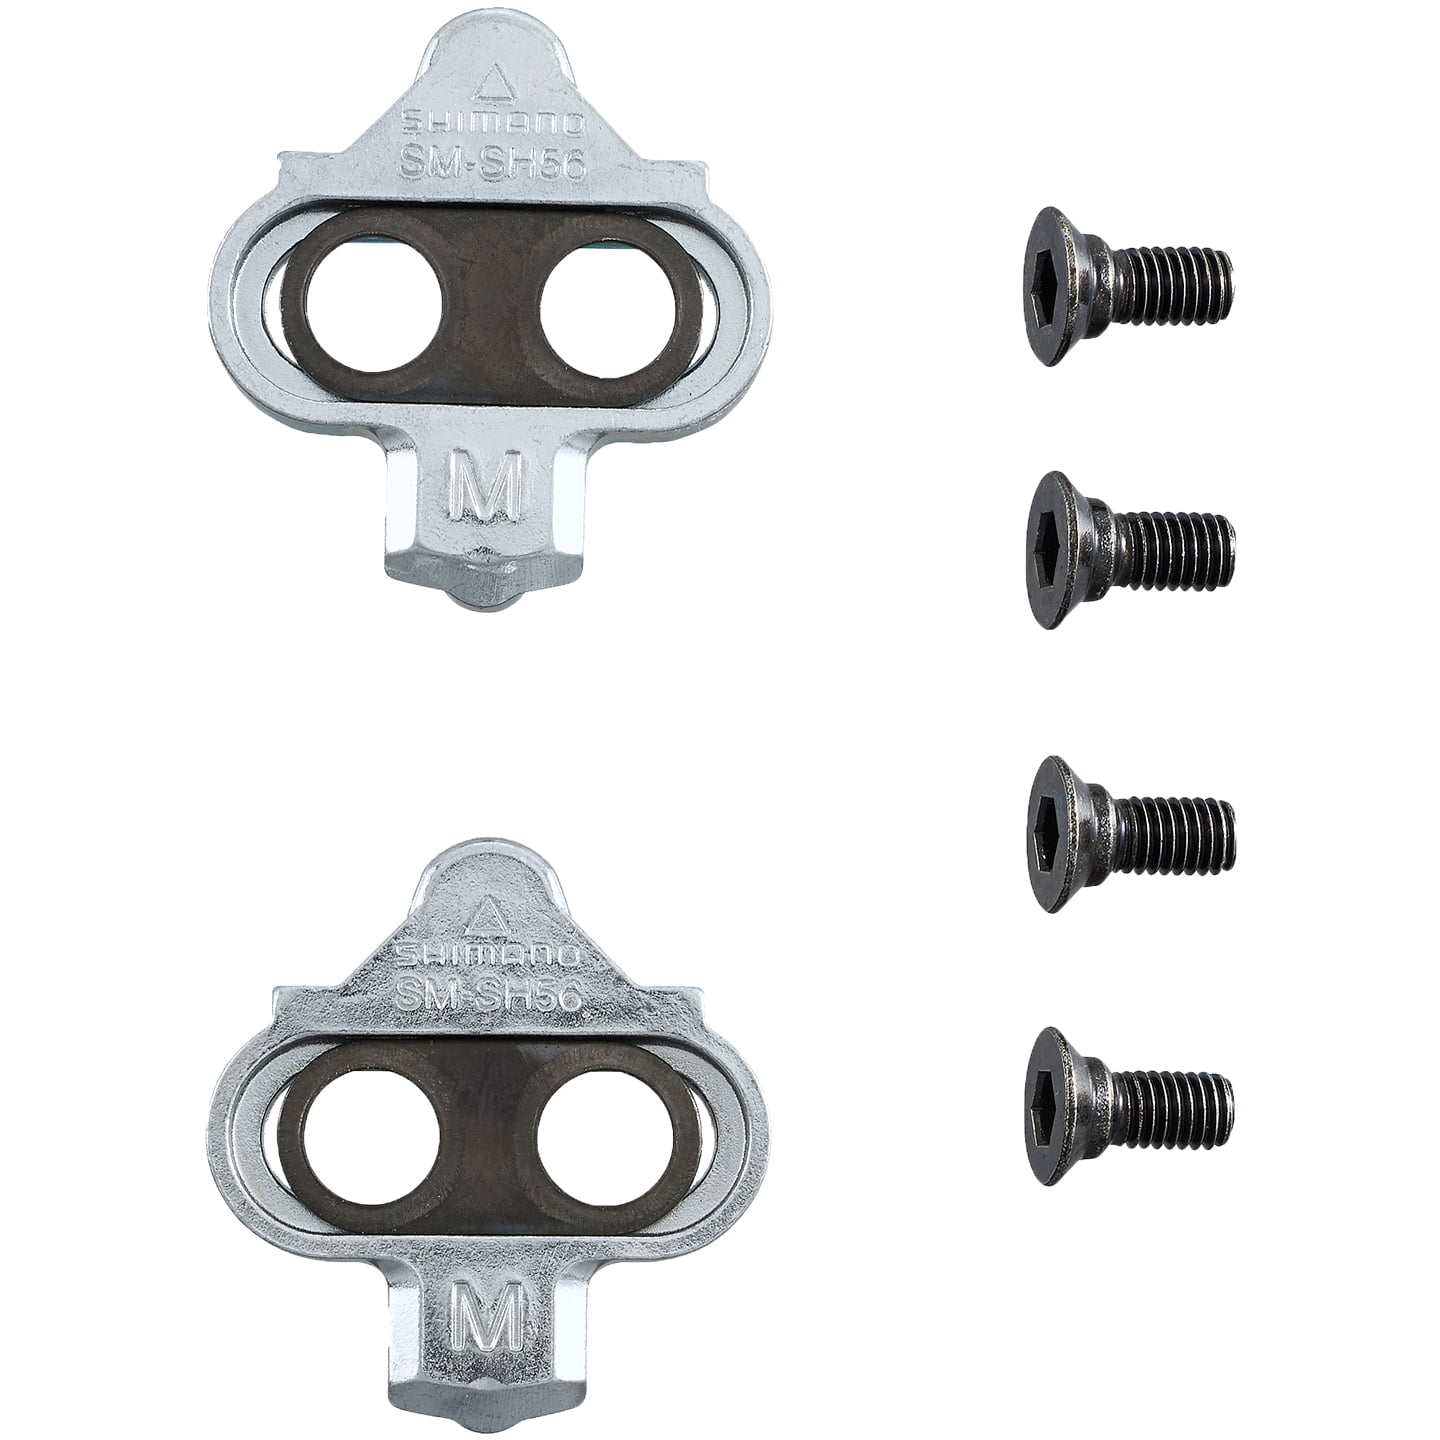 SHIMANO SM-SH56 SPD Cleats Pedal Cleats for MTB, Bike pedal, Bike accessories